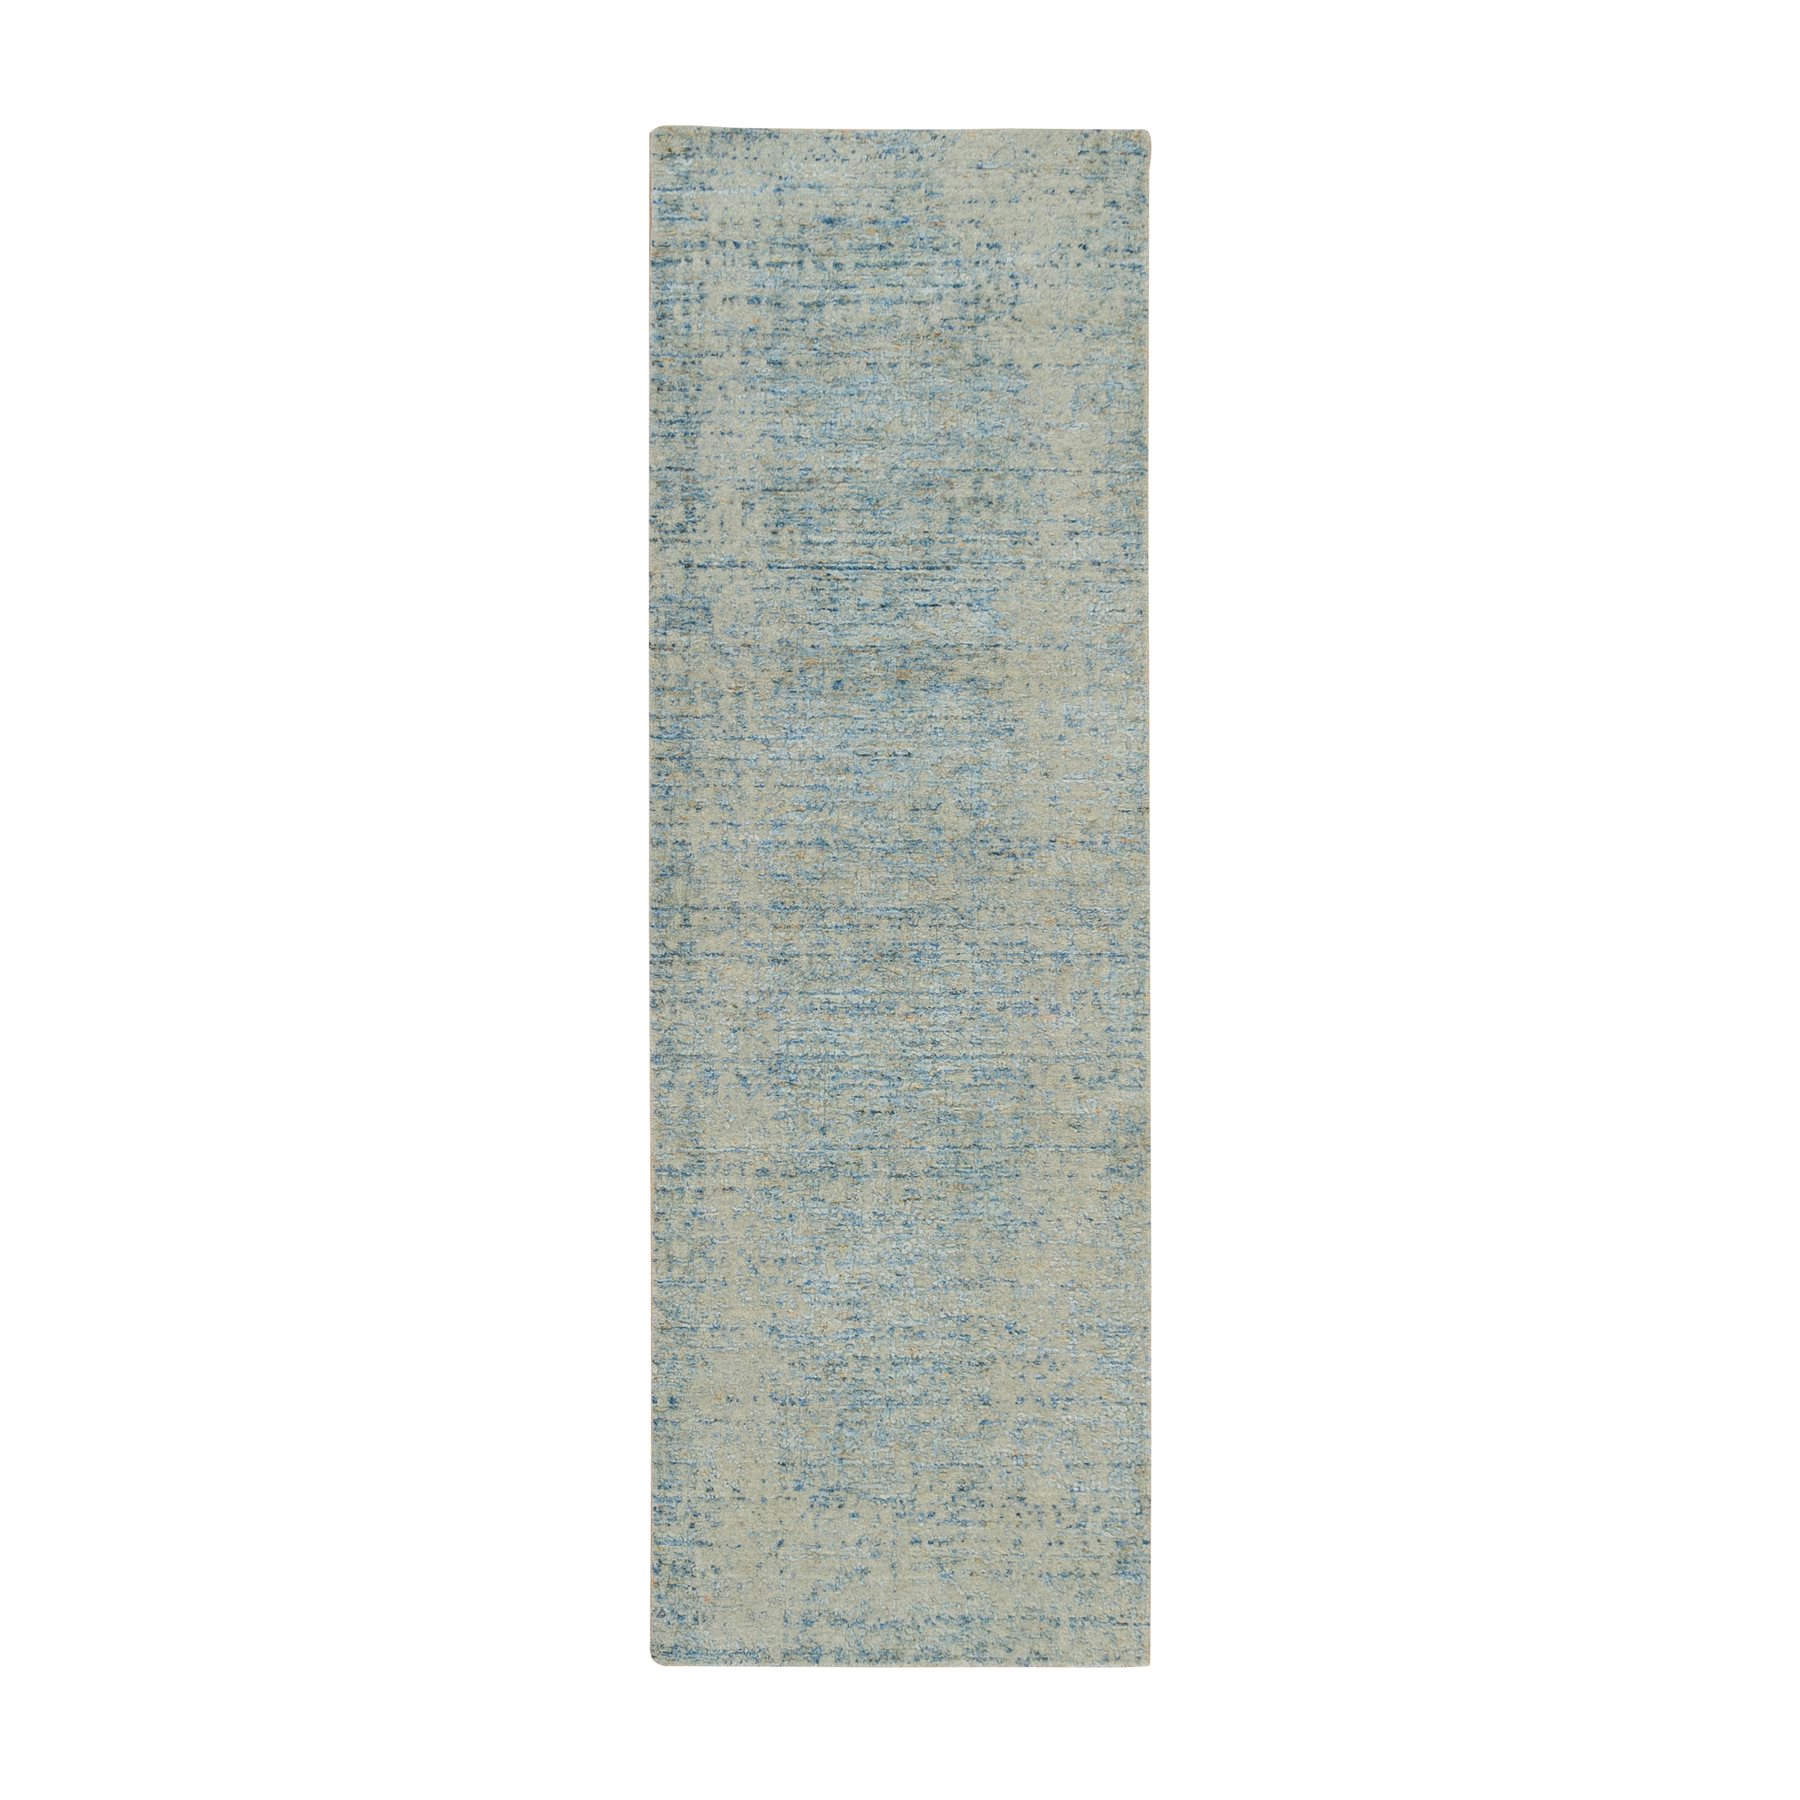 Gray with Touches of Blue, Modern Jacquard Hand Loomed, Soft to the Touch Wool and Plant Based Silk, Runner Oriental 